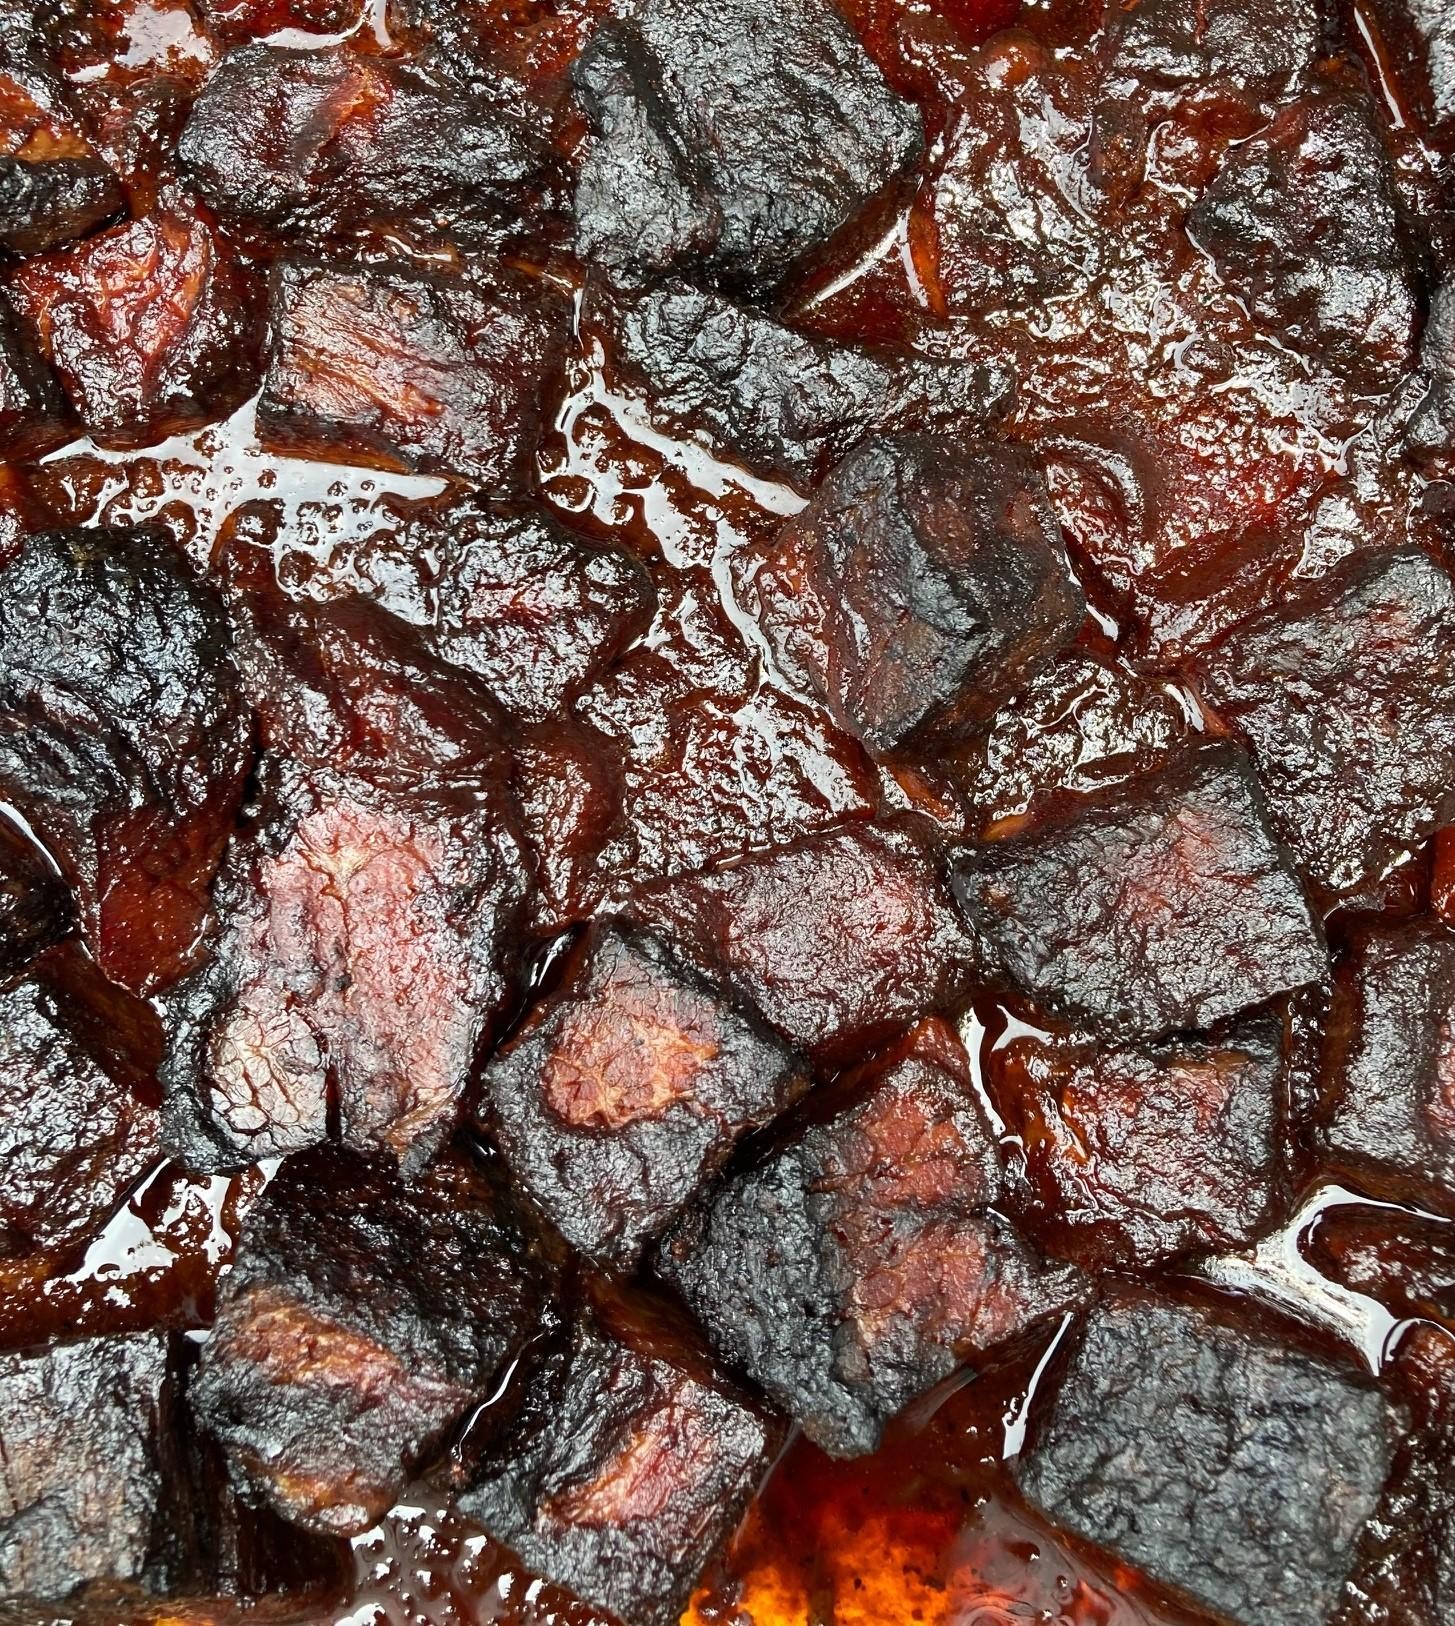 Brisket Burnt End Plate with Two Sides